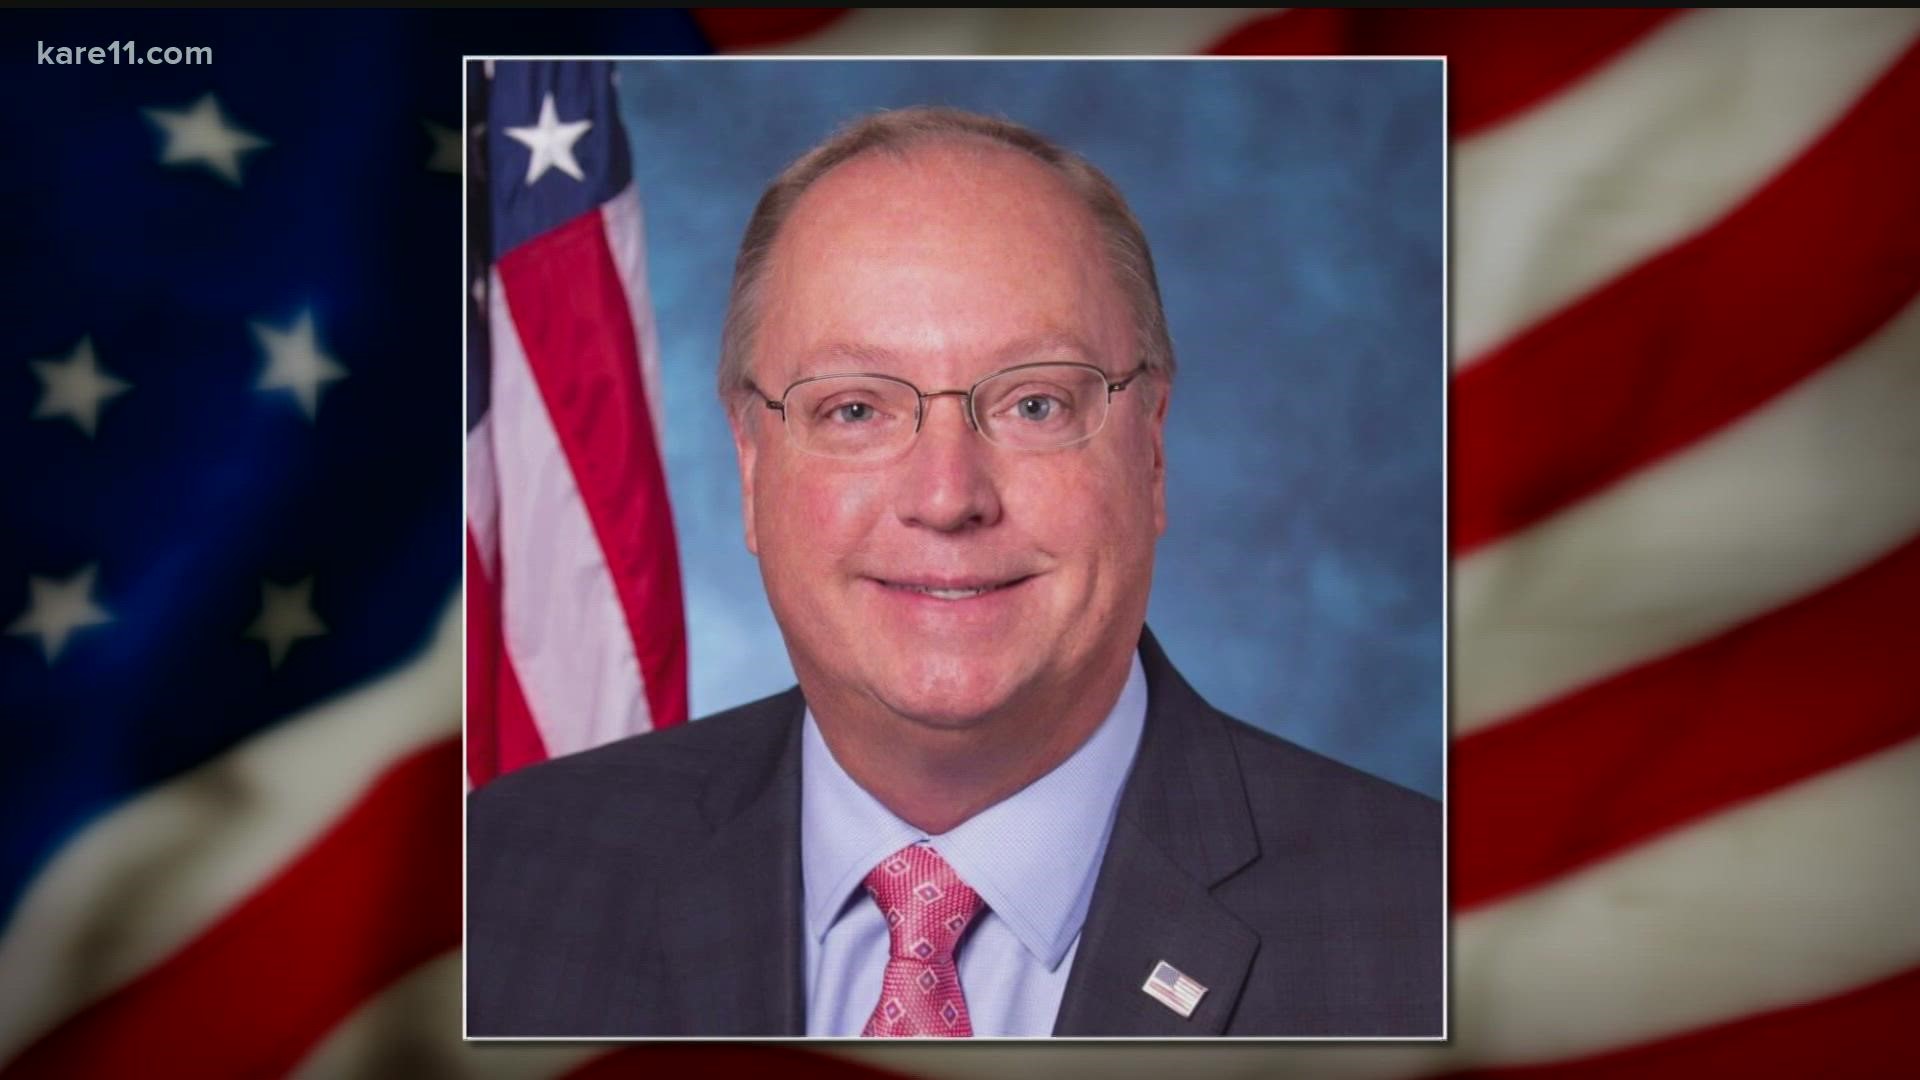 Condolences continue to pour in from both sides of the aisle for the late 1st District Rep. Jim Hagedorn, who died Thursday after battling cancer.